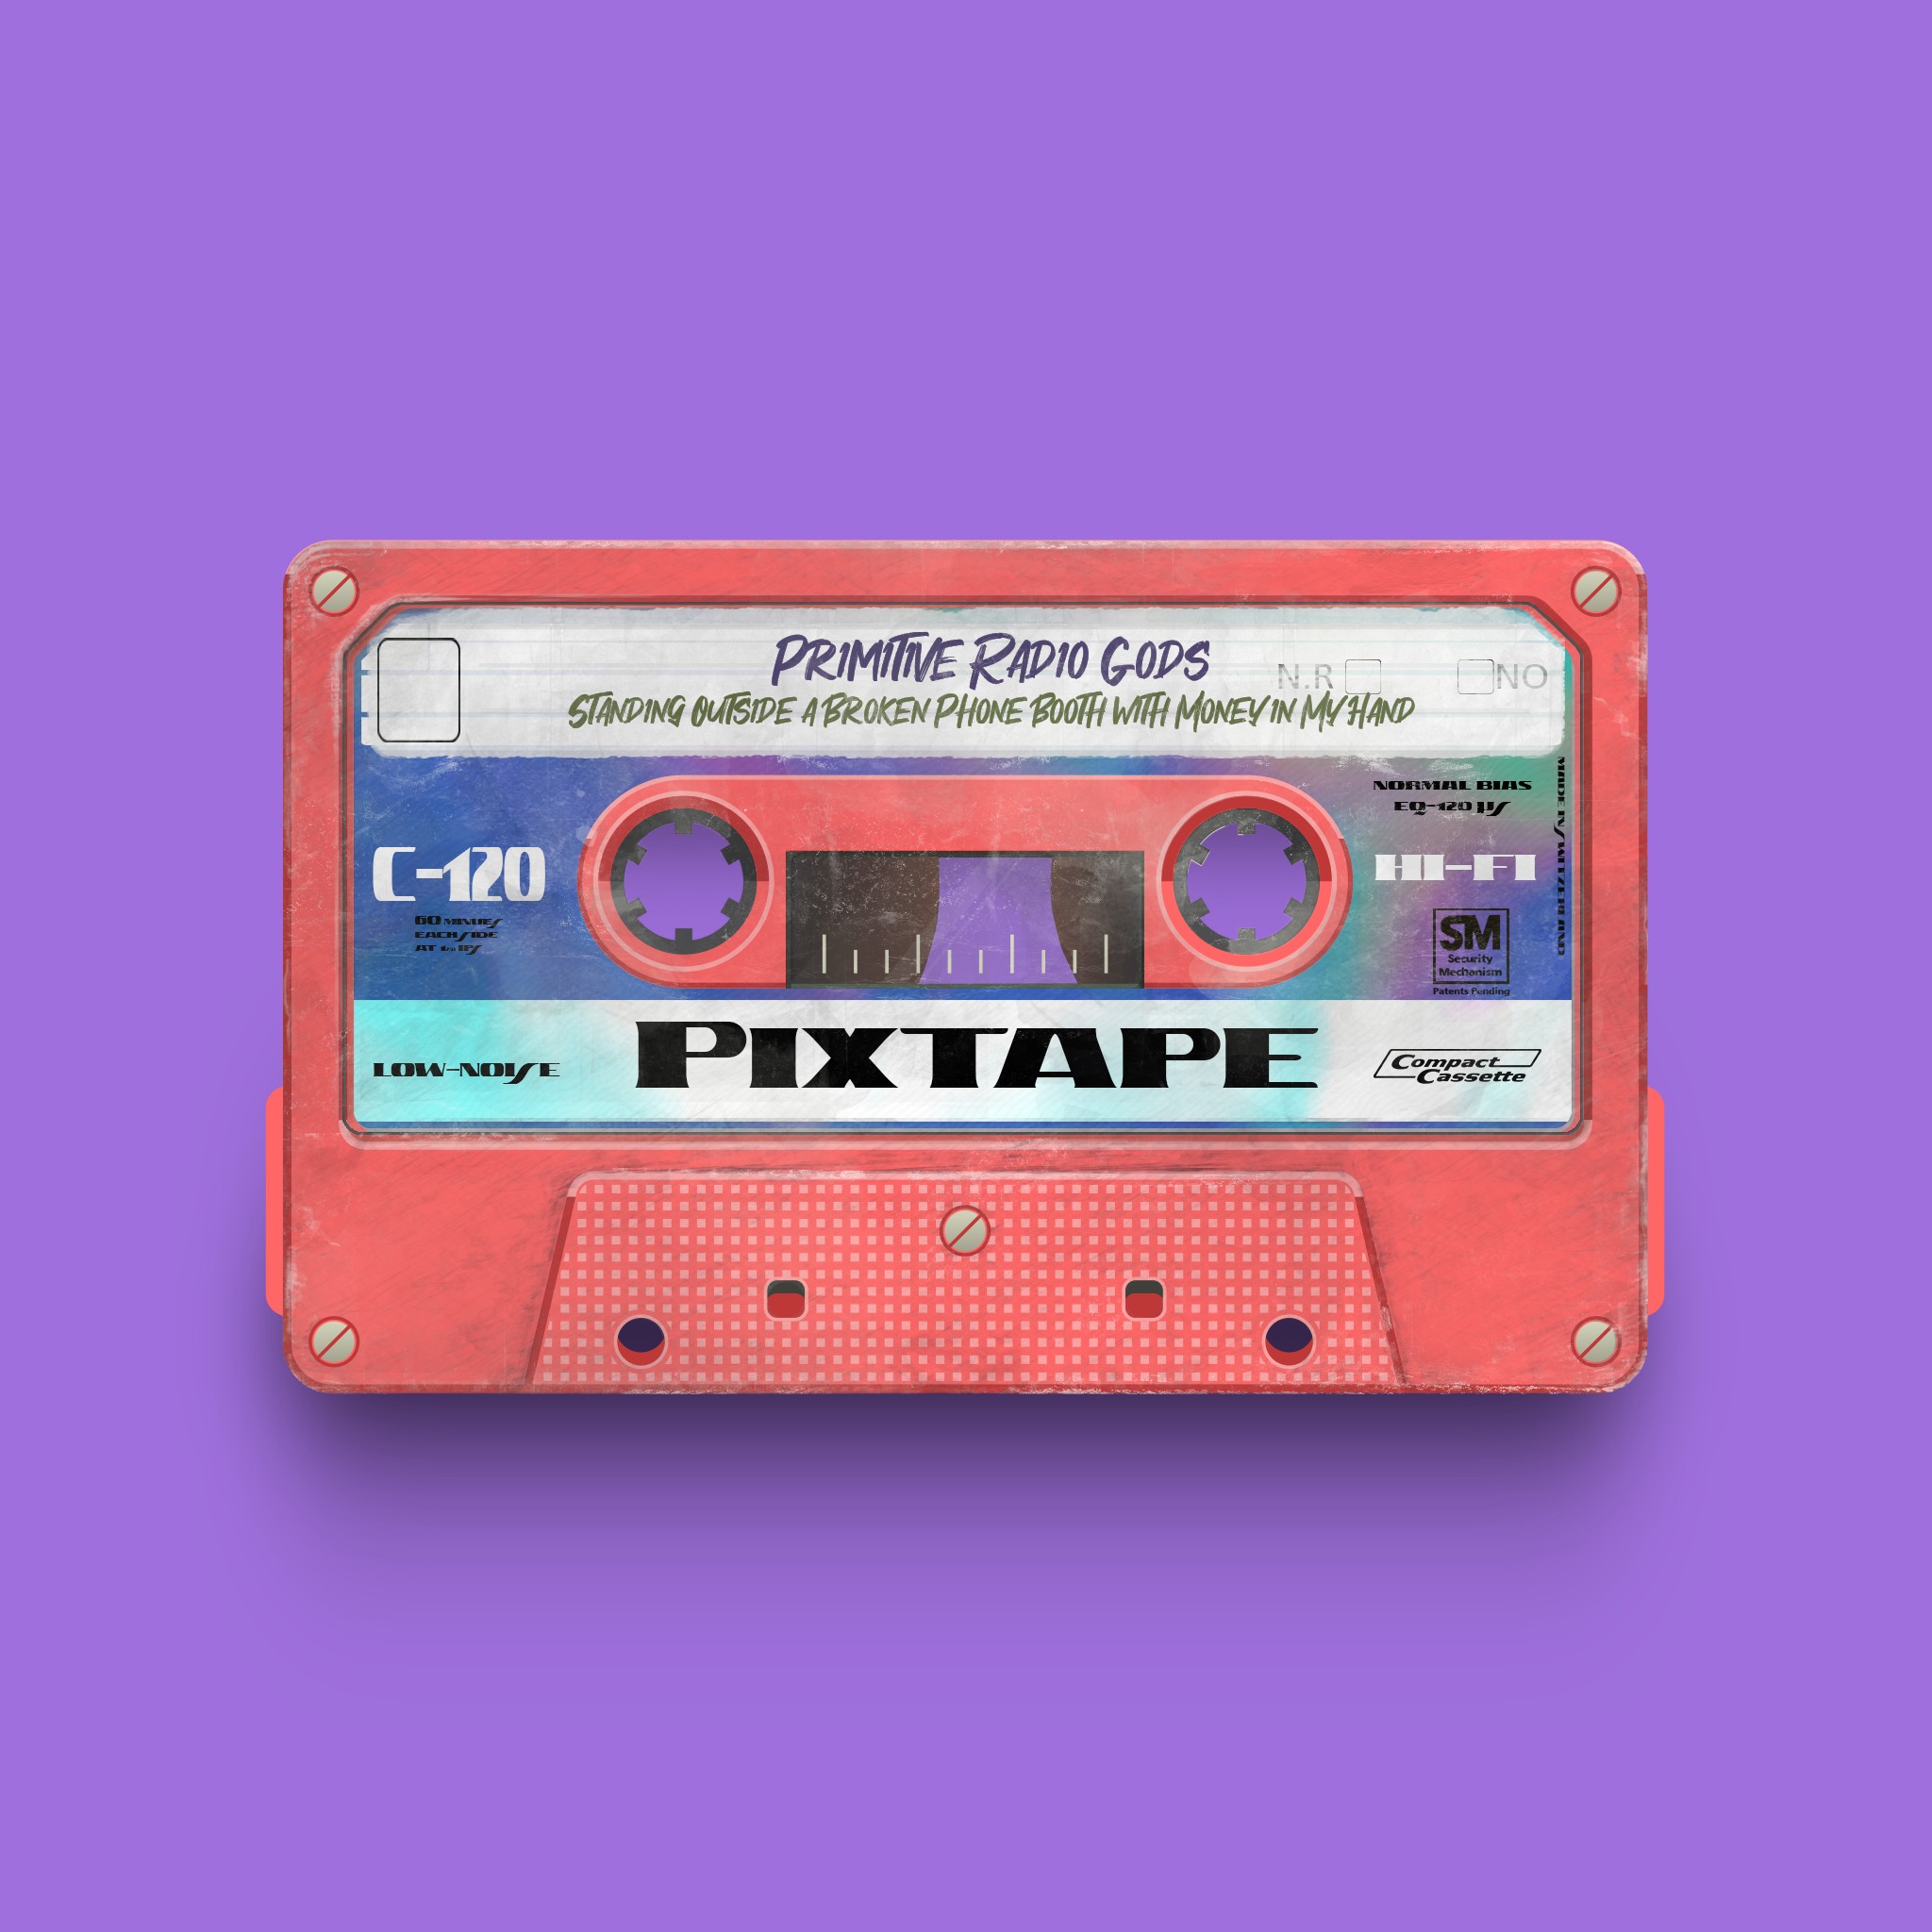 PixTape #9953 | Primitive Radio Gods - Standing Outside a Broken Phone Booth with Money in My Hand